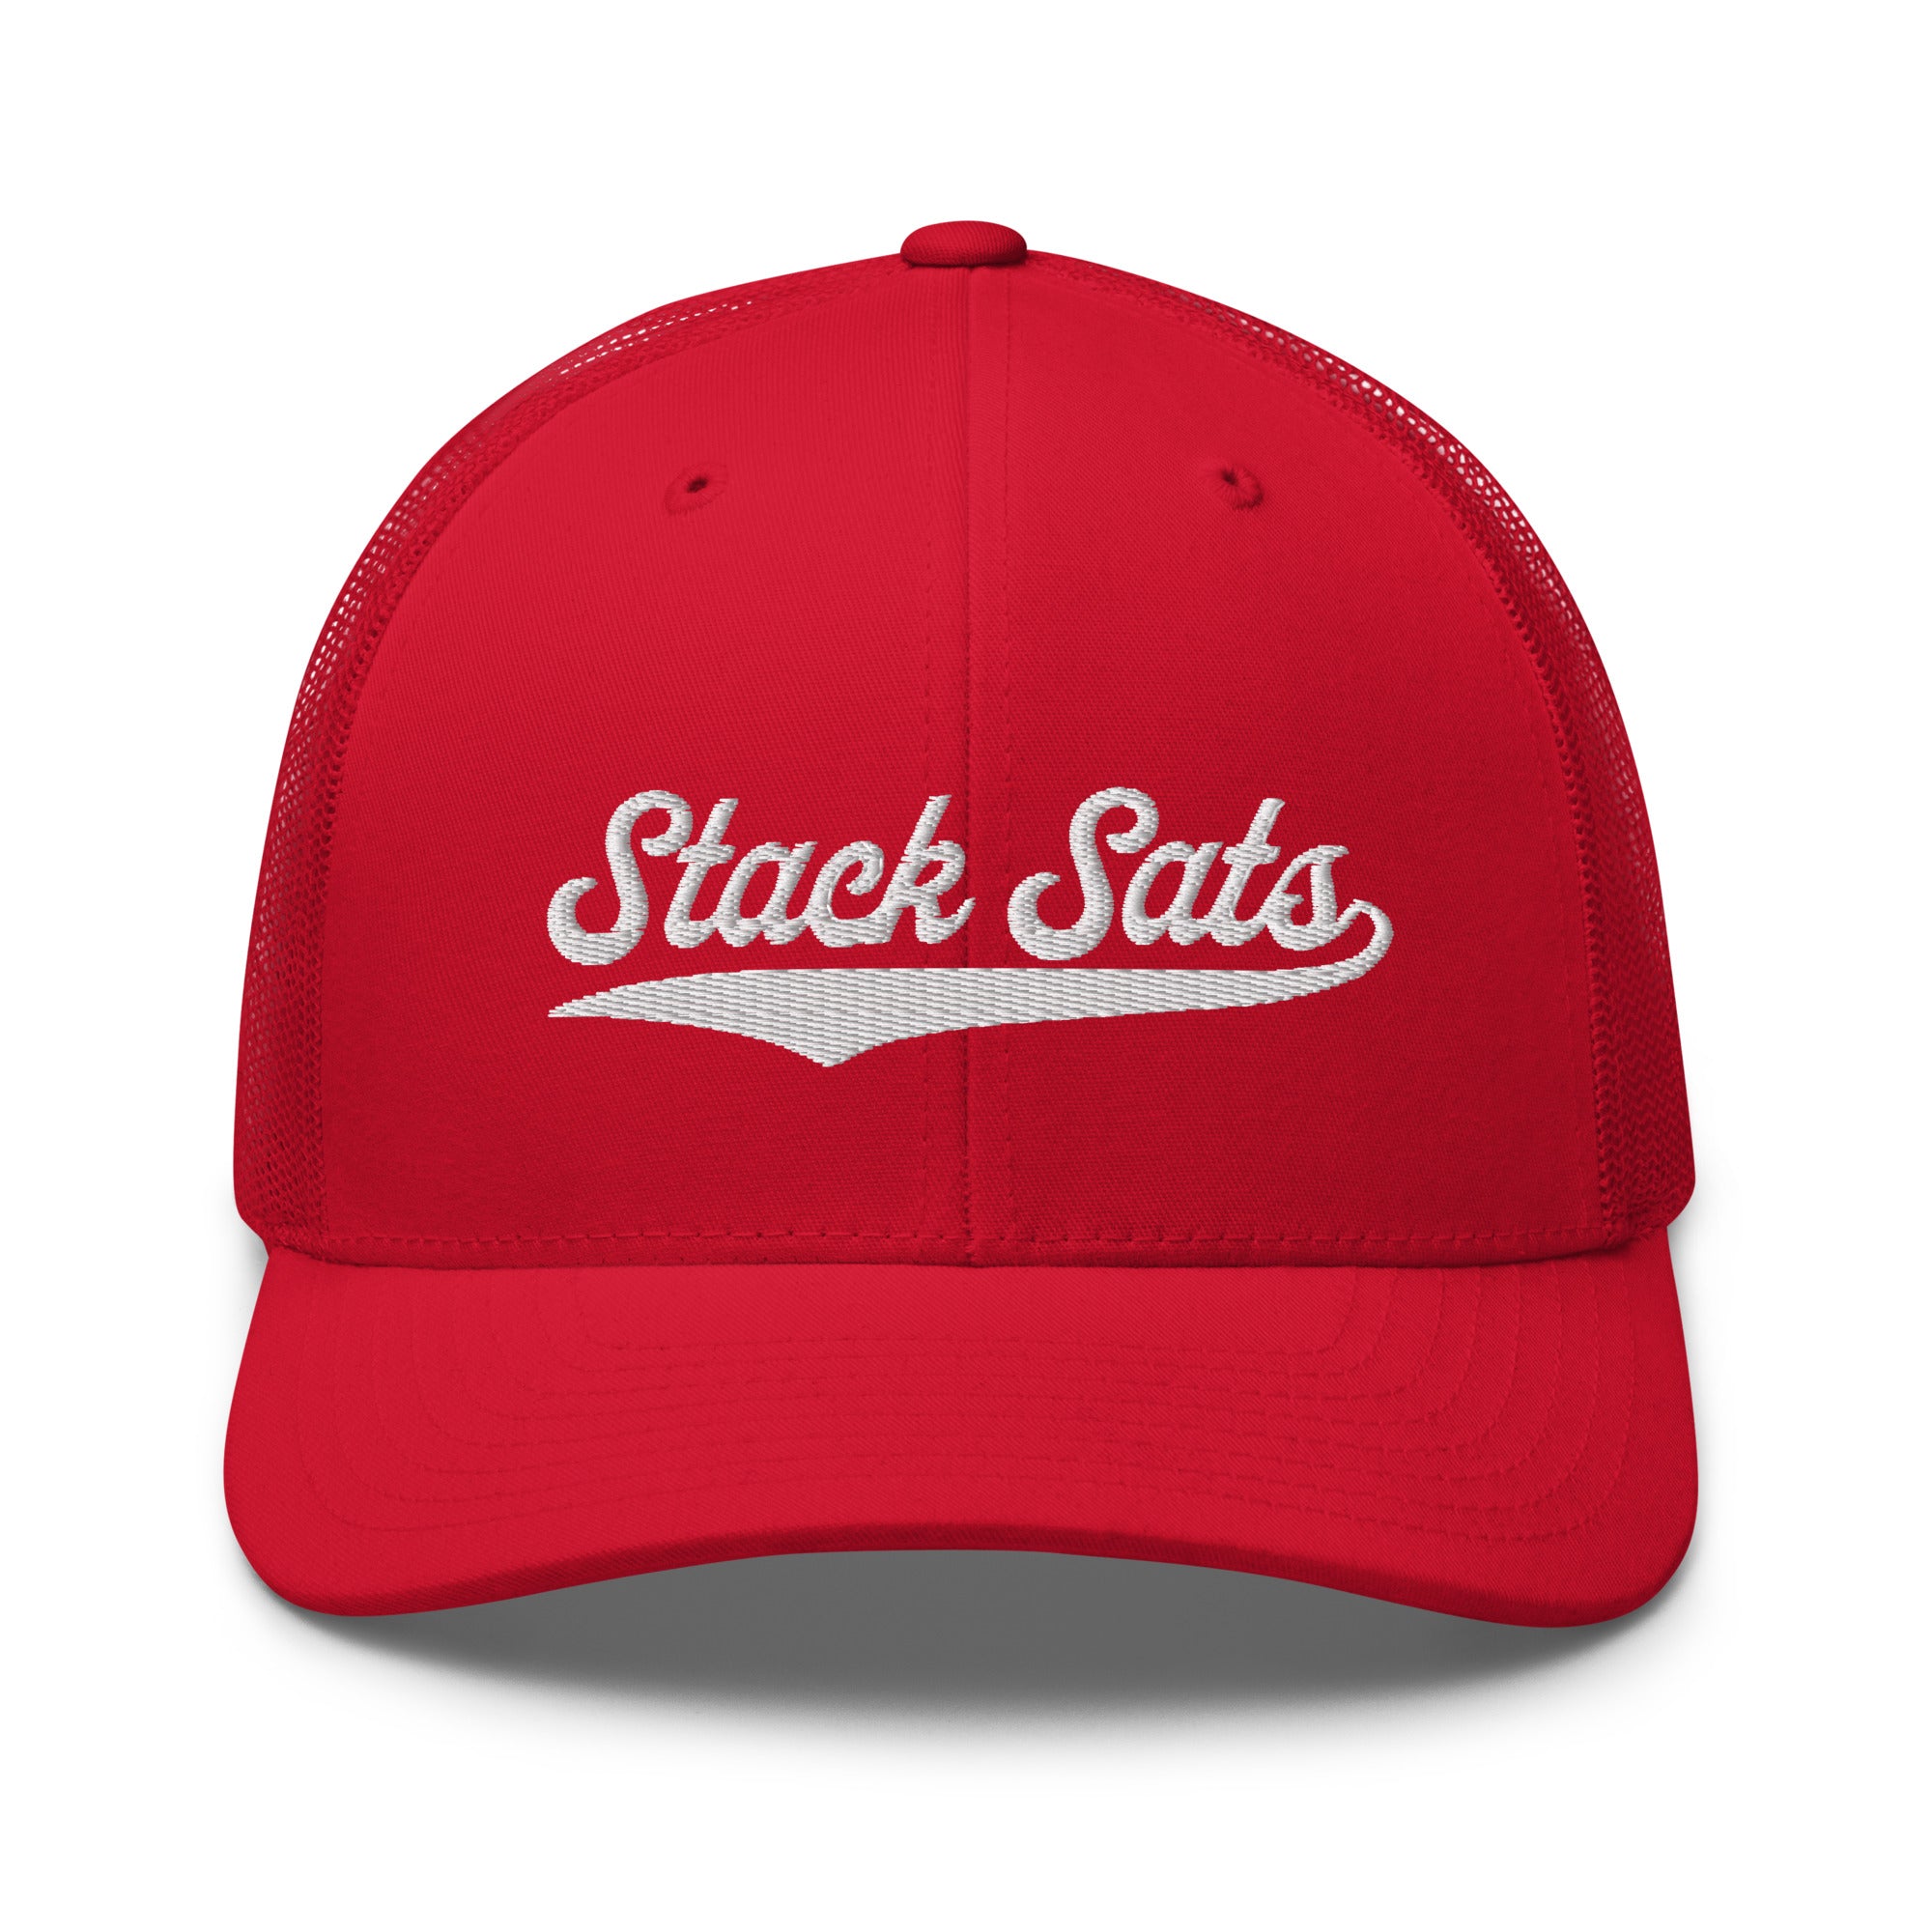 Bitcoin Hat - The Stack Sats Trucker Hat features a bold script logo. Color: Red. Front view.